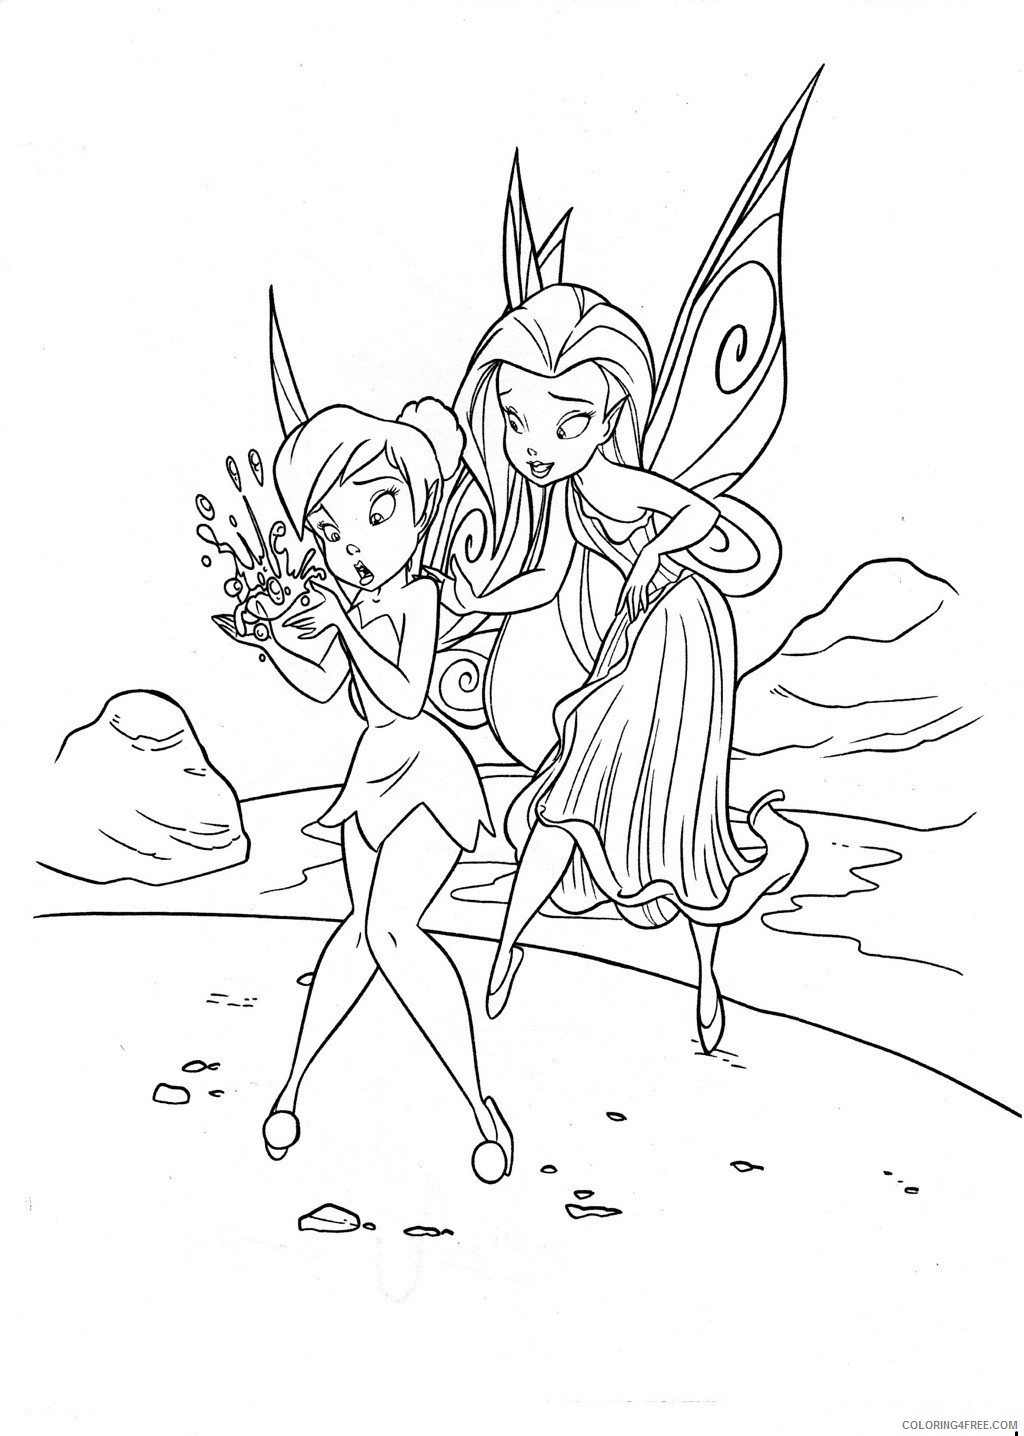 Tinker Bell Coloring Pages Cartoons Tinkerbell and Friends Printable 2020 6599 Coloring4free